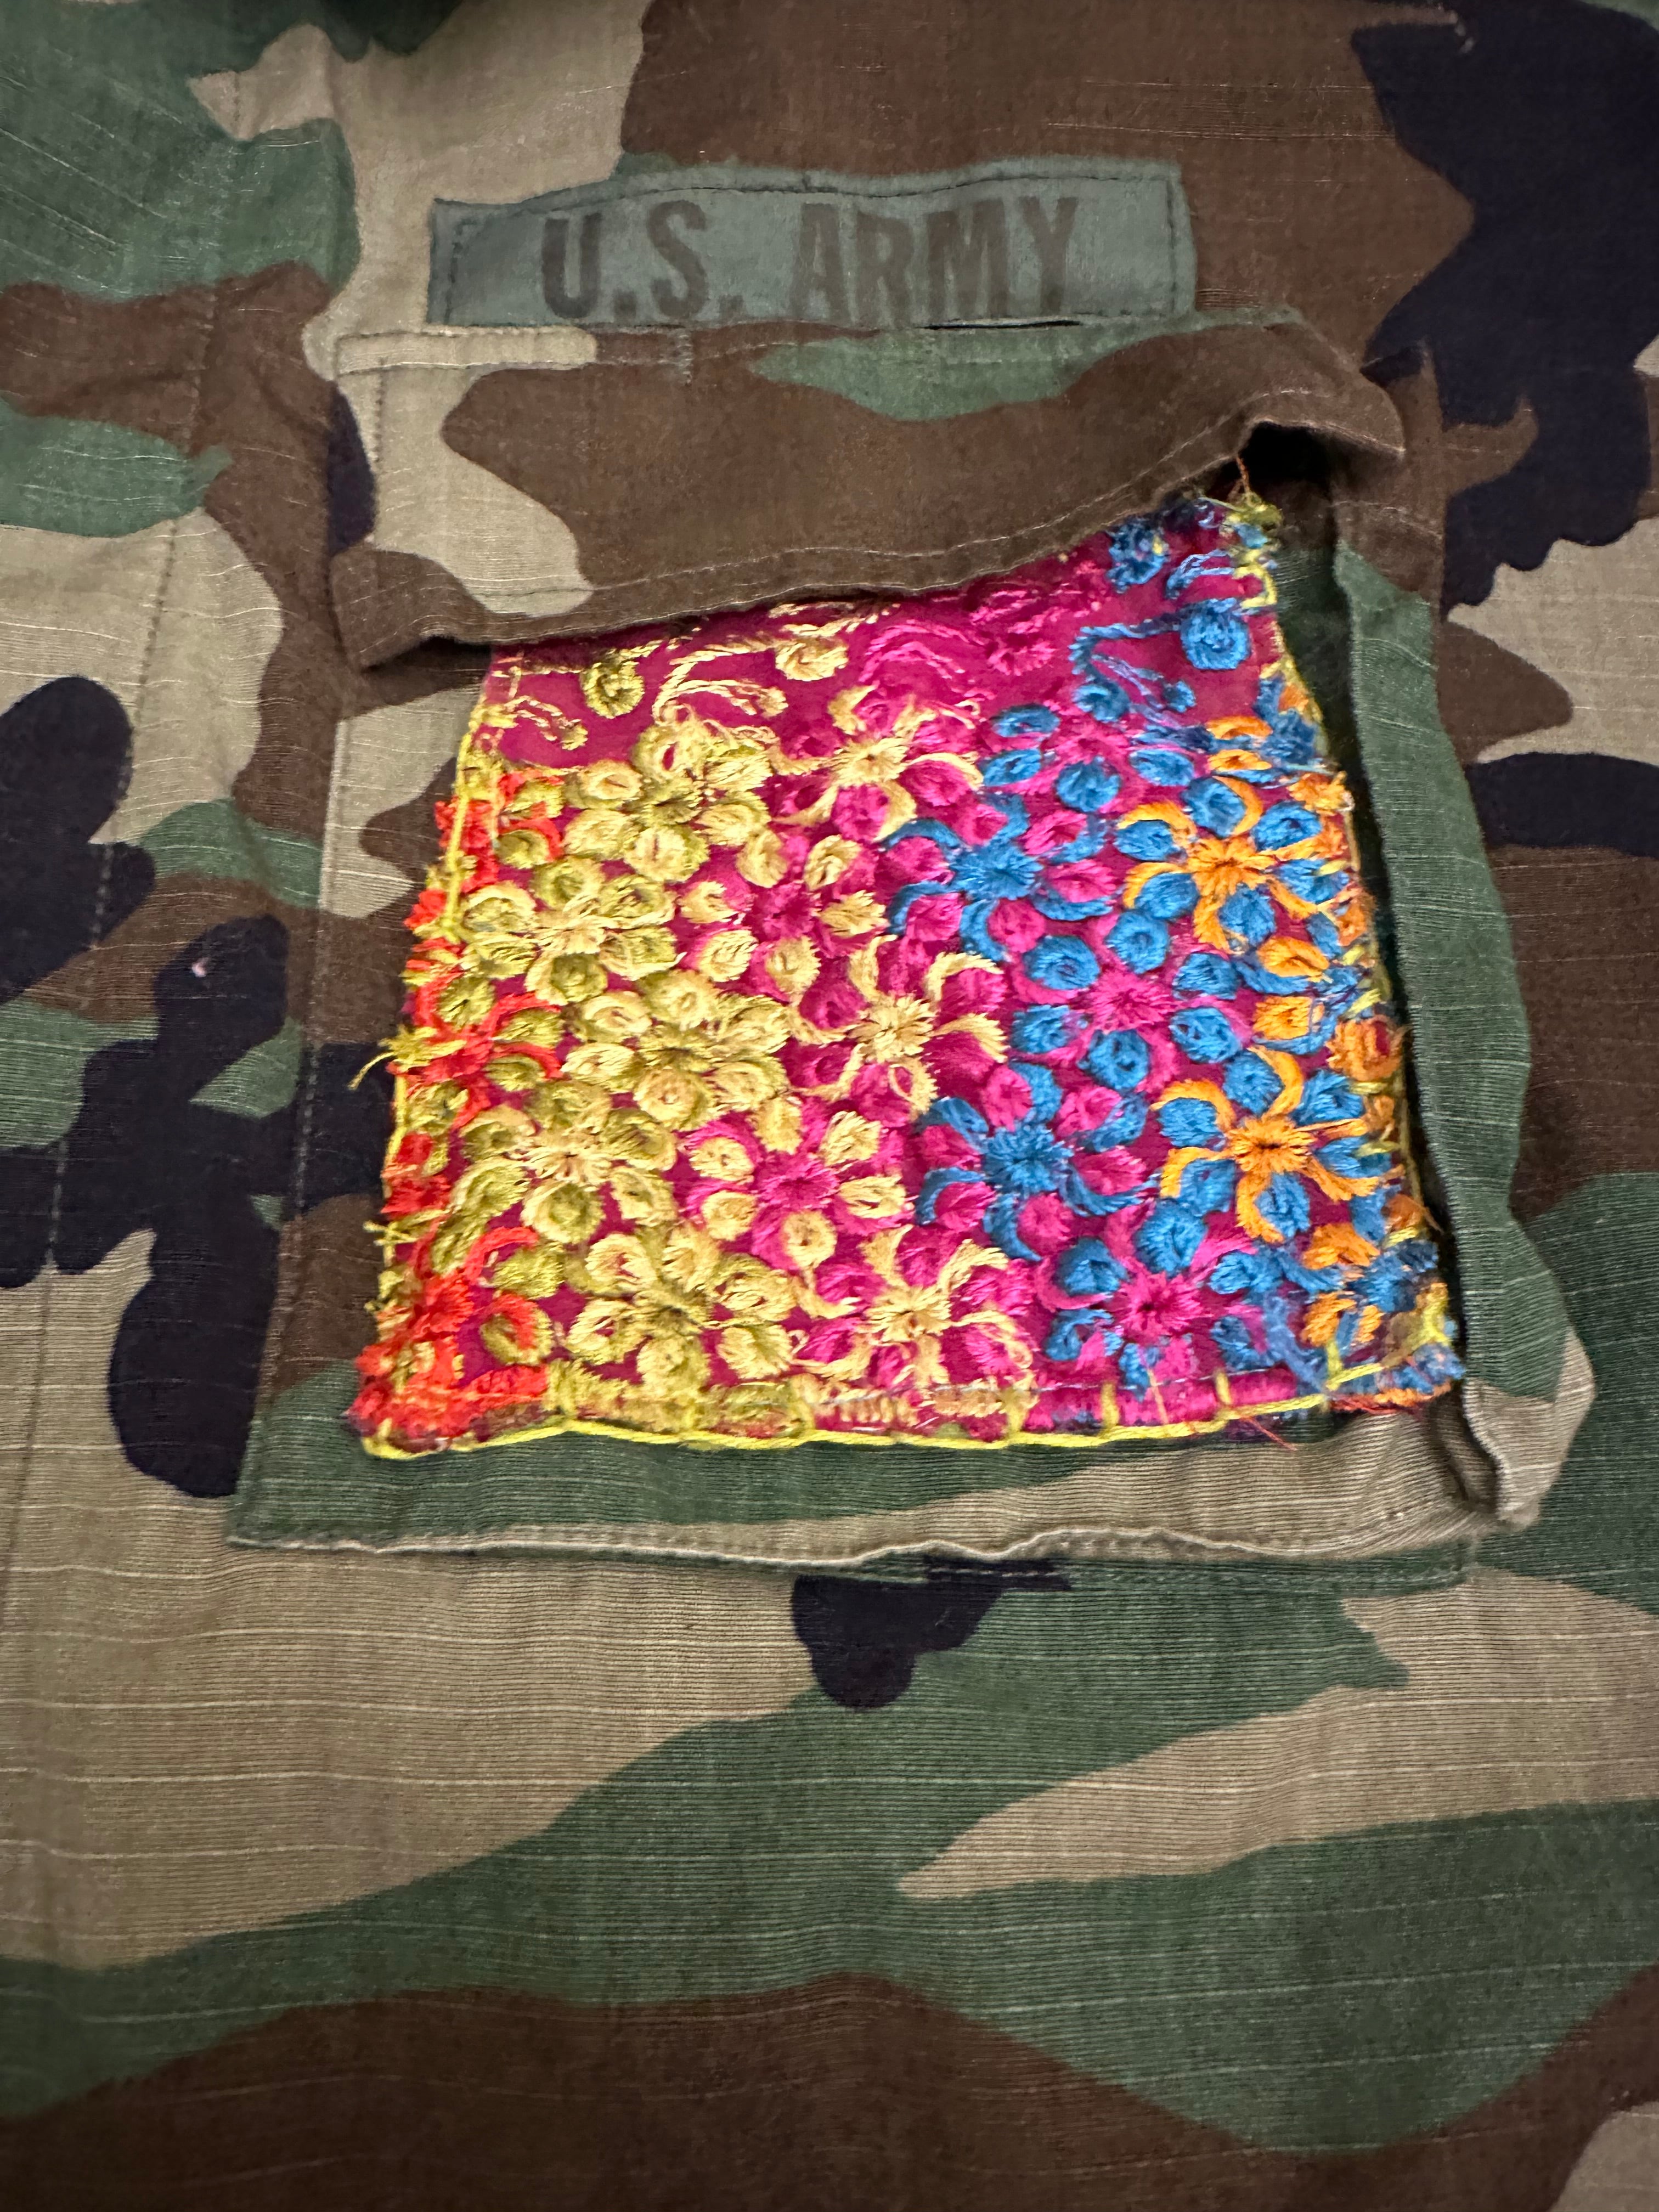 Sold -Camo Jacket - Decorated  - Bright